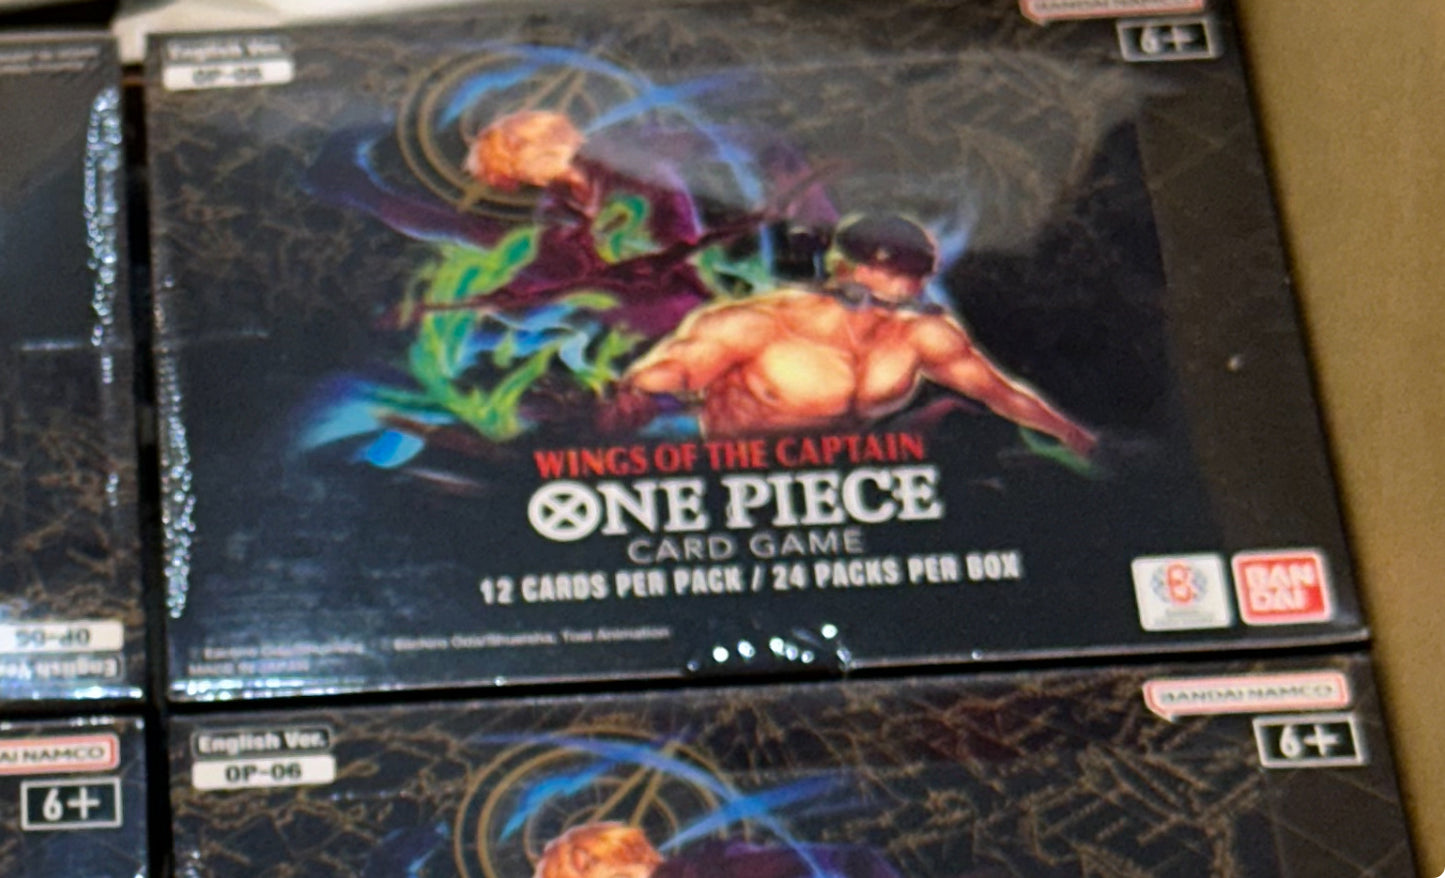 One Piece | OP-06 | Wings Of The Captain Booster Box ENGLISH Sealed ( or packs )